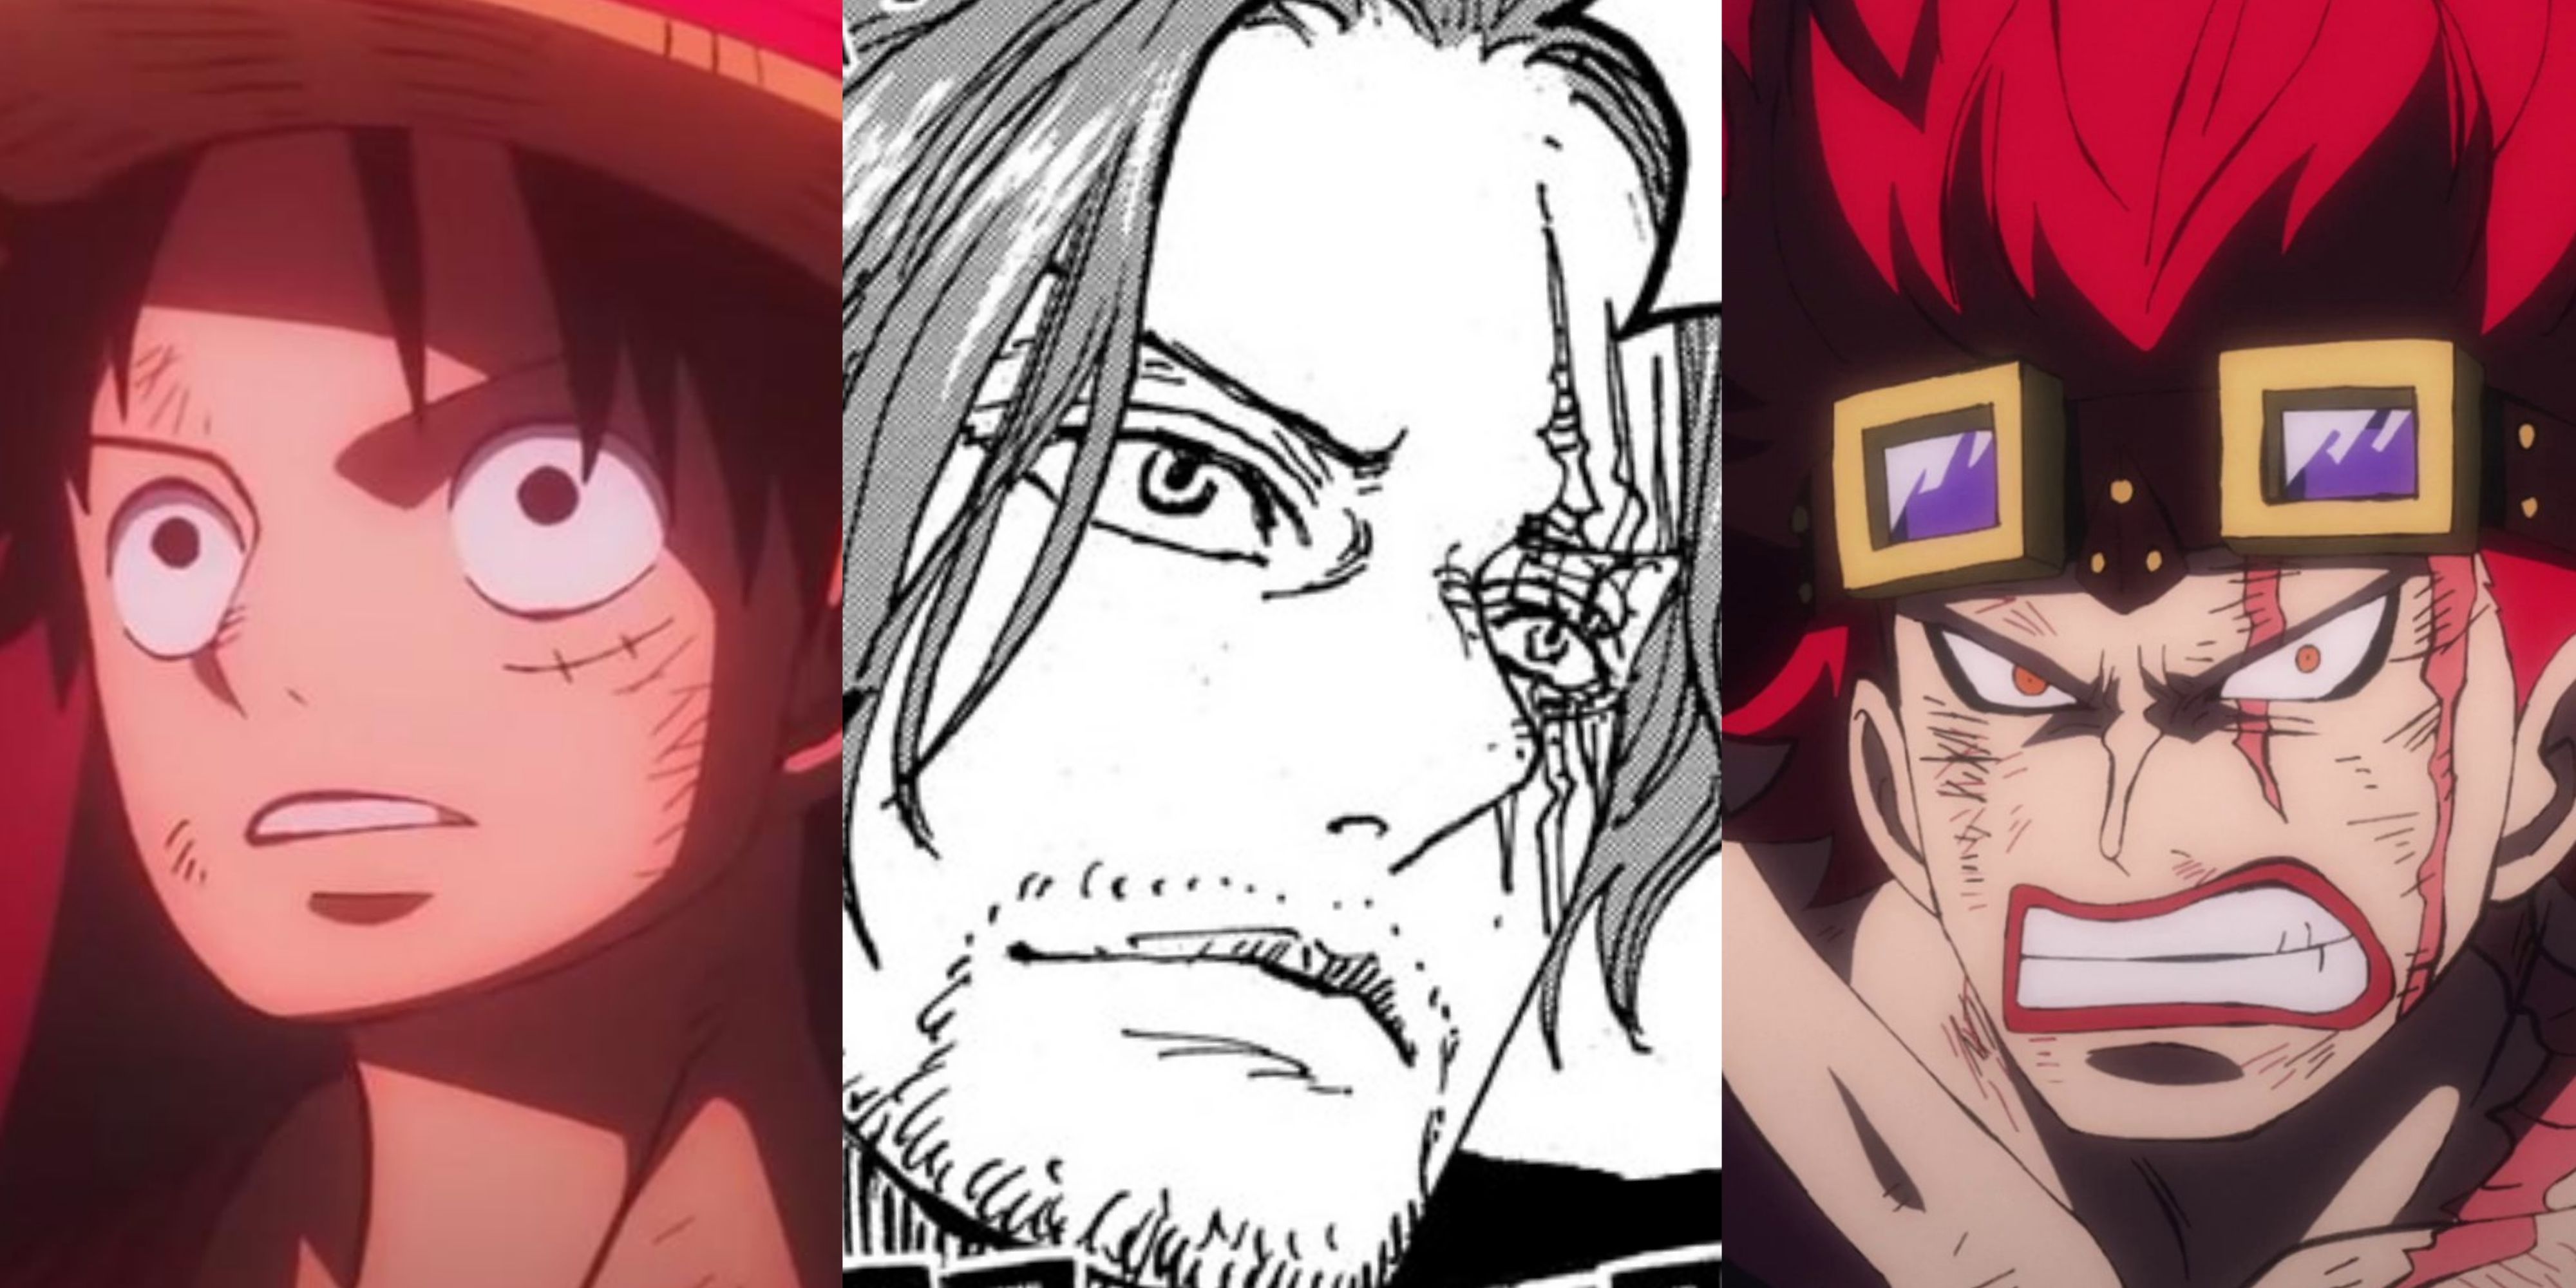 Featured One Piece Fans Expect From Elbaf arc Shanks Kid Luffy